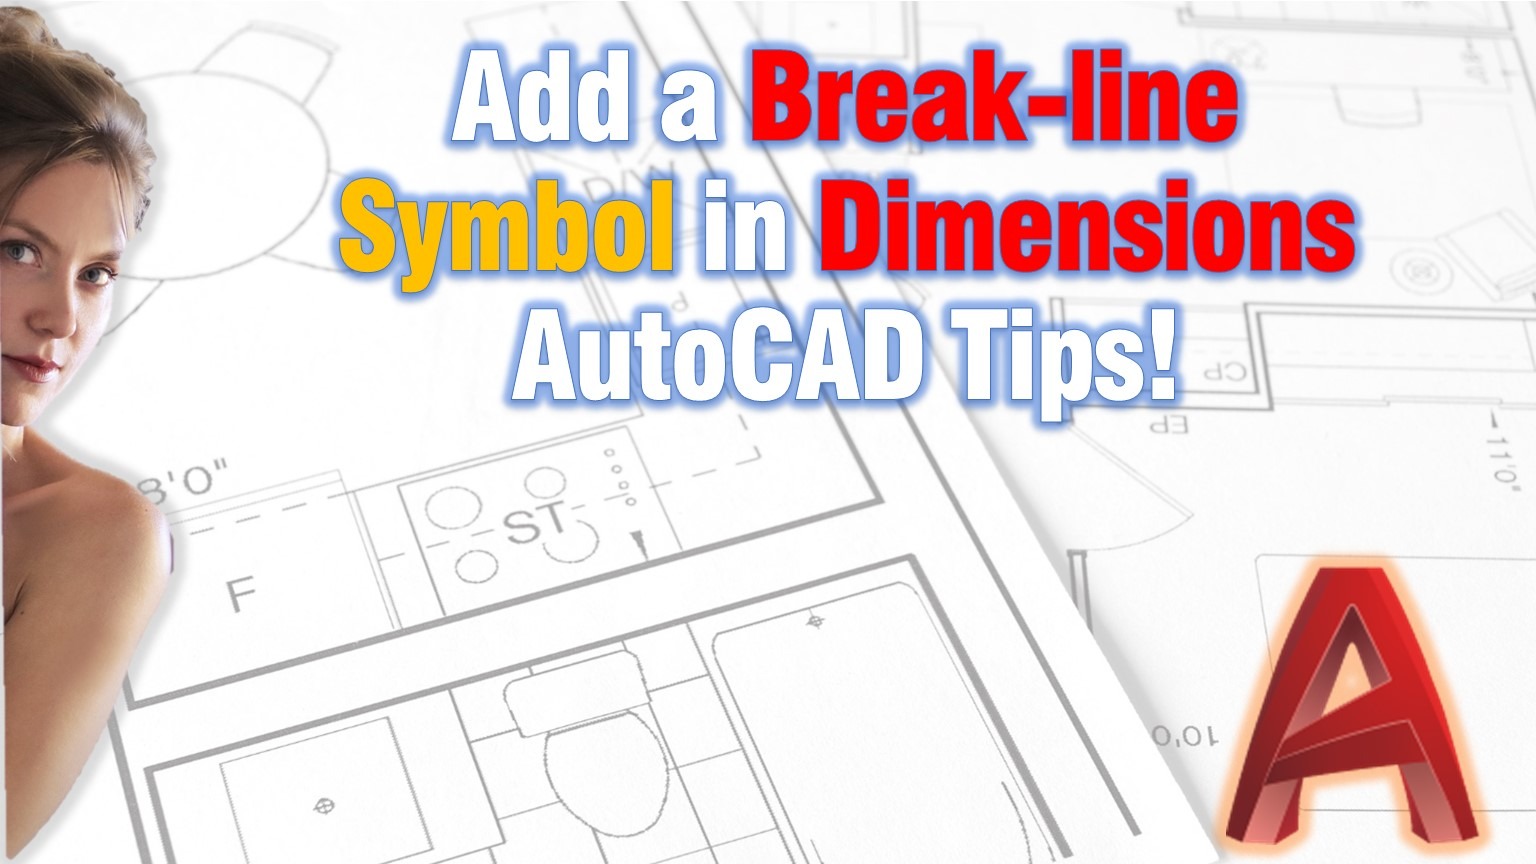 How to add Break-line symbol to Dimensions in AutoCAD